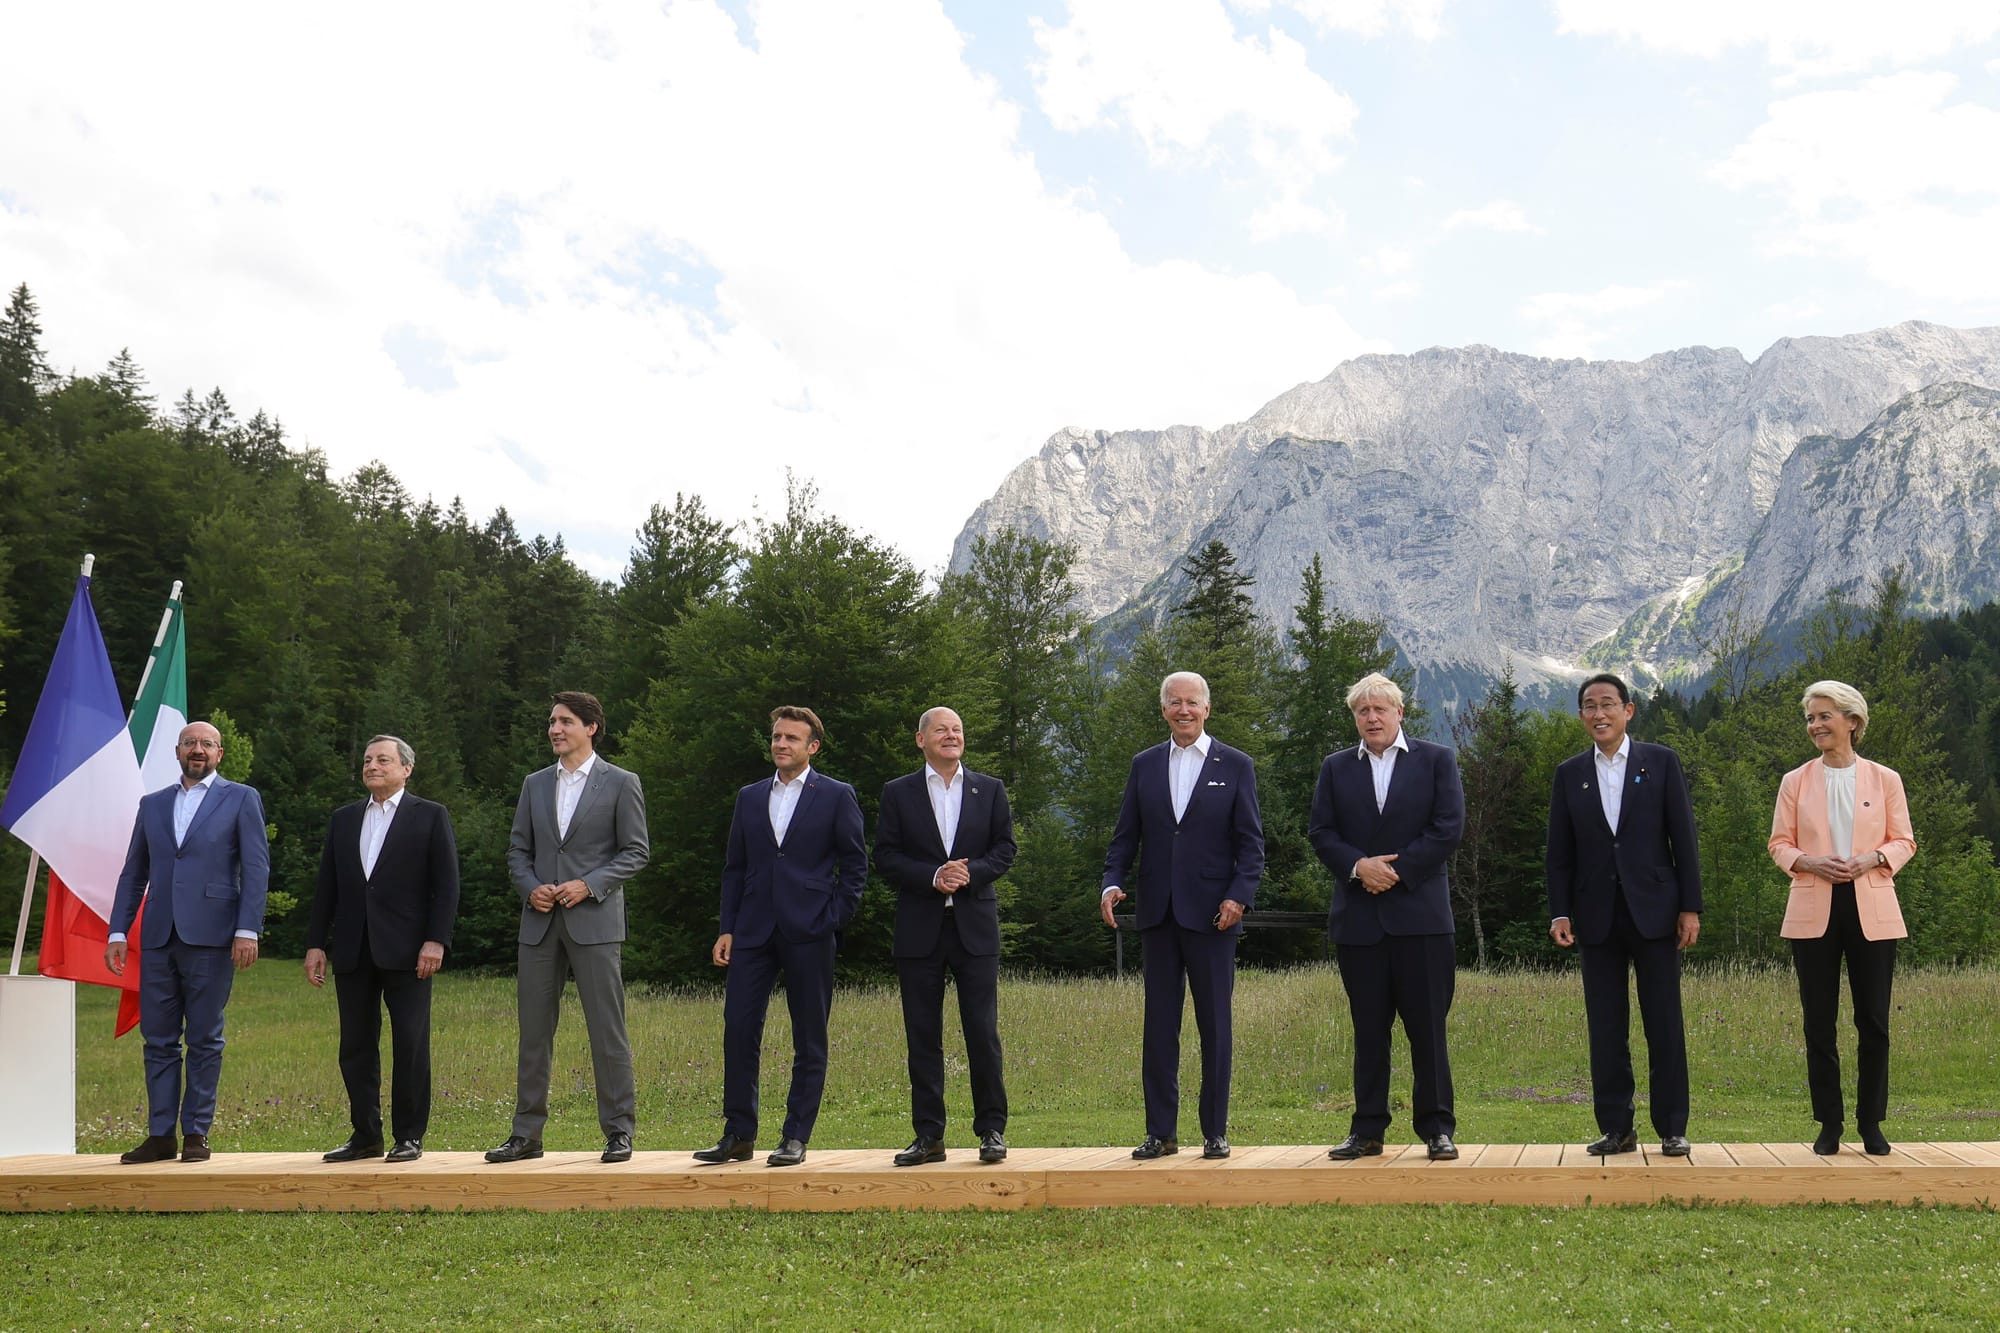 (L-R) G7 world leaders European Council President Charles Michel, Italian PM Mario Draghi, Canadian PM Justin Trudeau, French President Emmanuel Macron, German Chancellor Olaf Scholz, U.S. President Joe Biden, UK PM Boris Johnson, Japan's PM Fumio Kishida and European Commission President Ursula von der Leyen pose during the 2022 G7 Summit in Schloss Elmau in the Bavarian Alps. All excepting von der Leyen are wearing dark suits, dark shoes, and light shirts unbuttoned at the throat, with no ties